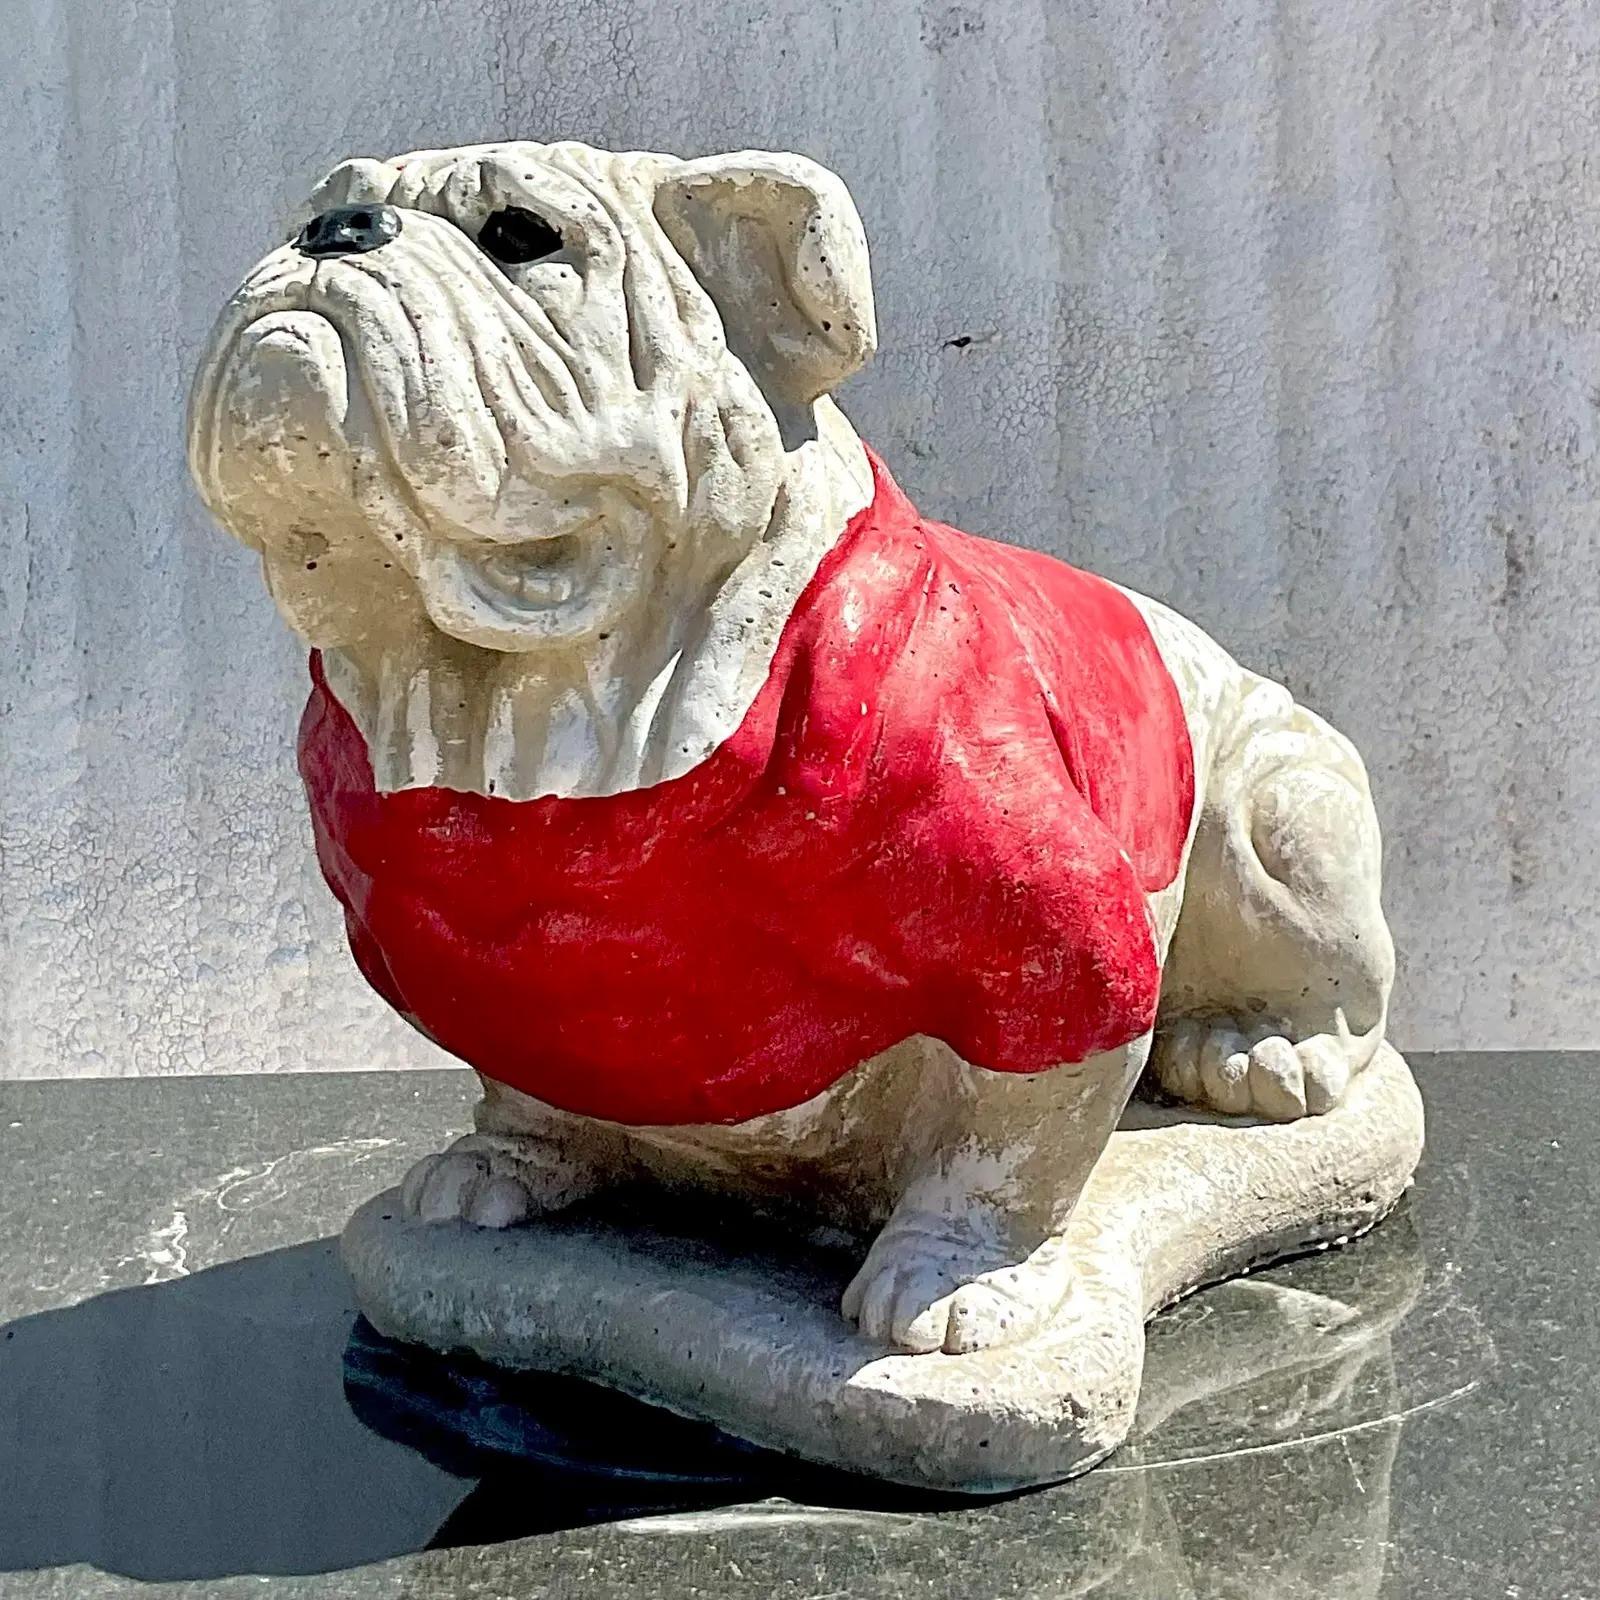 A fantastic vintage Georgia bulldog statue. An easy way to add a little charm to any indoor or outdoor space. Hand painted detail in bright clear colors. A real crowd pleaser. Acquired from a Palm Beach estate.